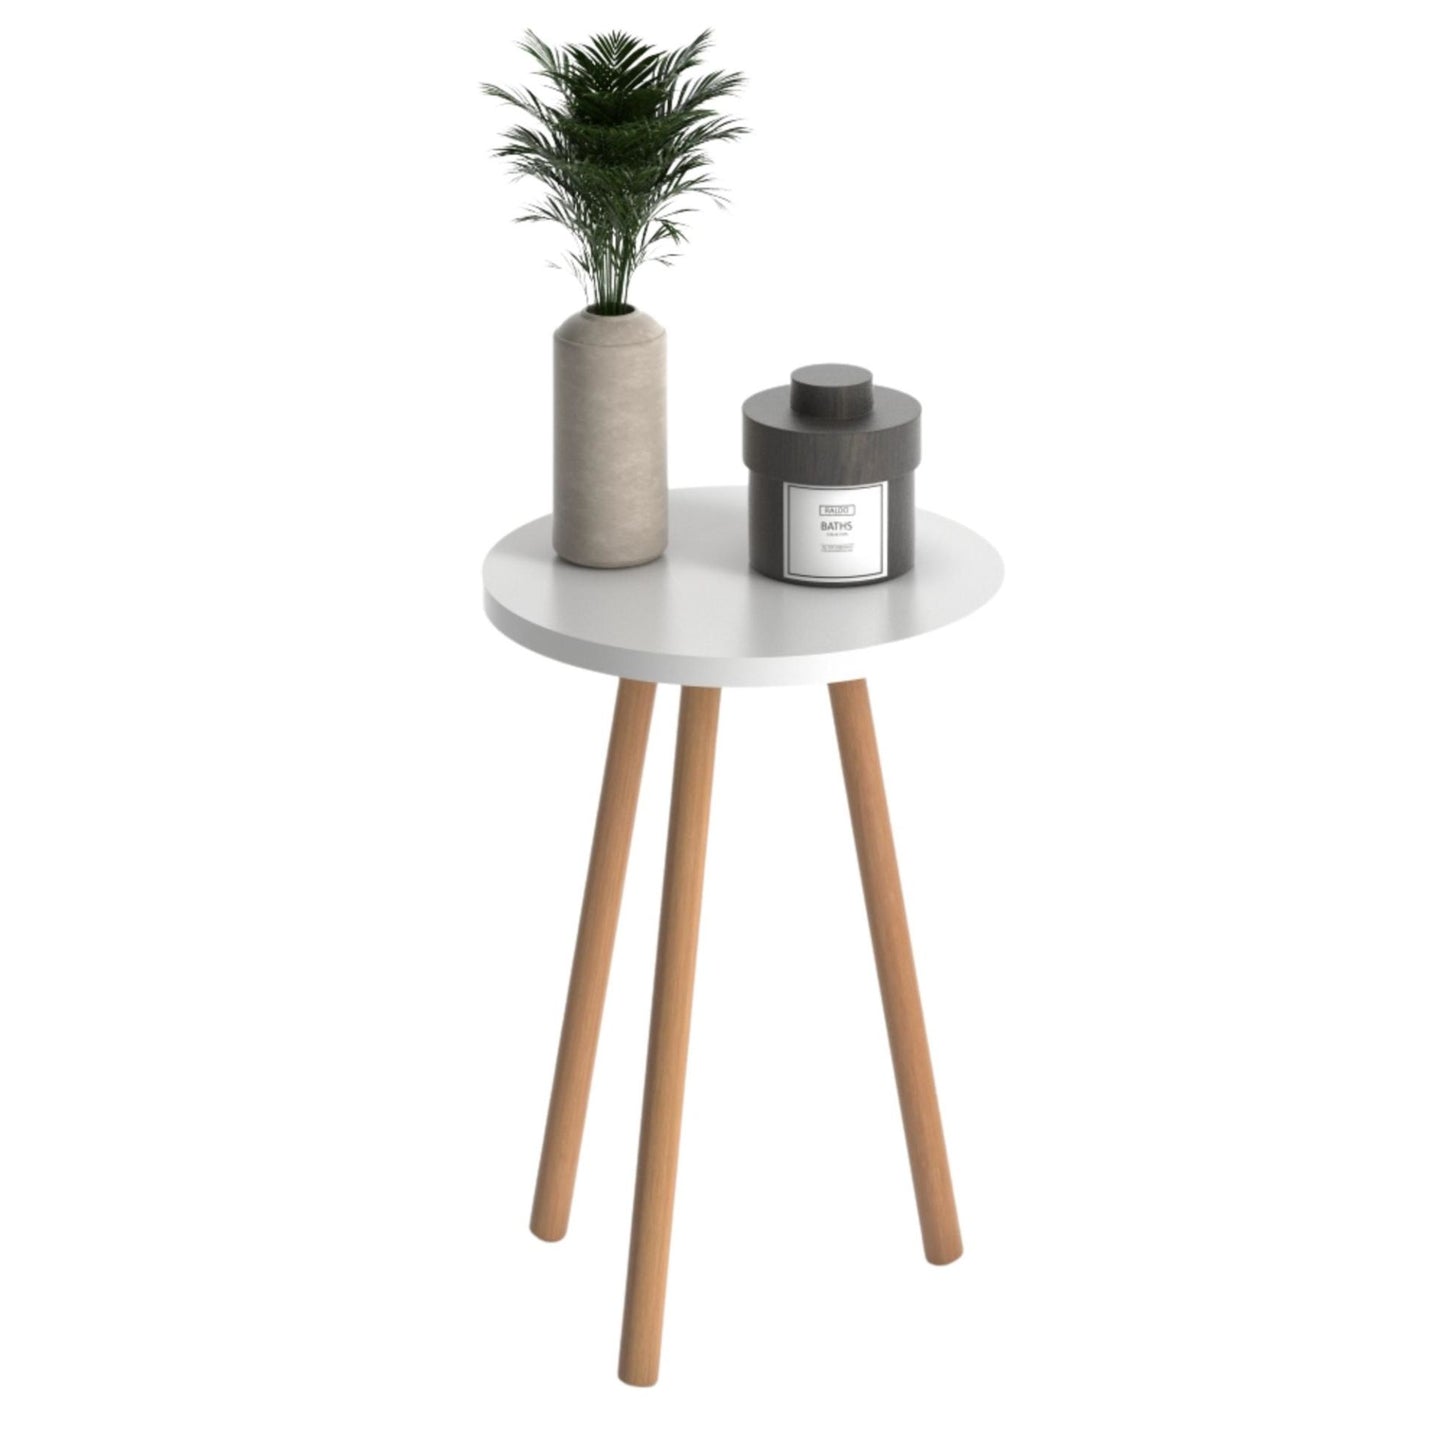 Table d’appoint scandinave